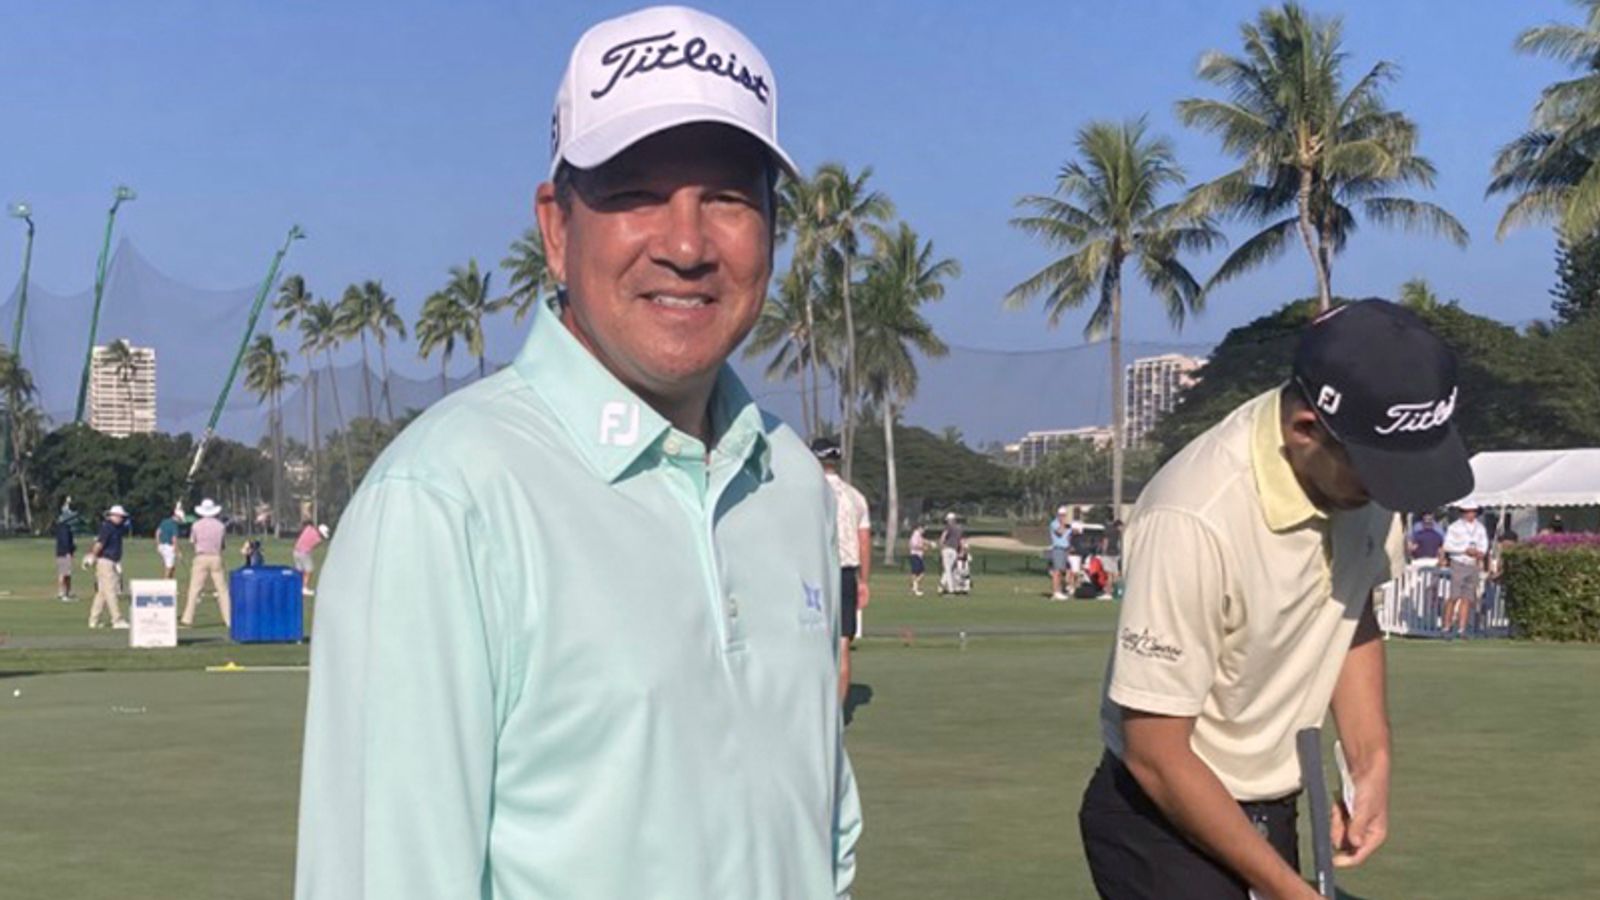 Sony Open: Sixty-year-old cancer sufferer Michael Castillo makes PGA Tour debut in Hawaii | Golf News